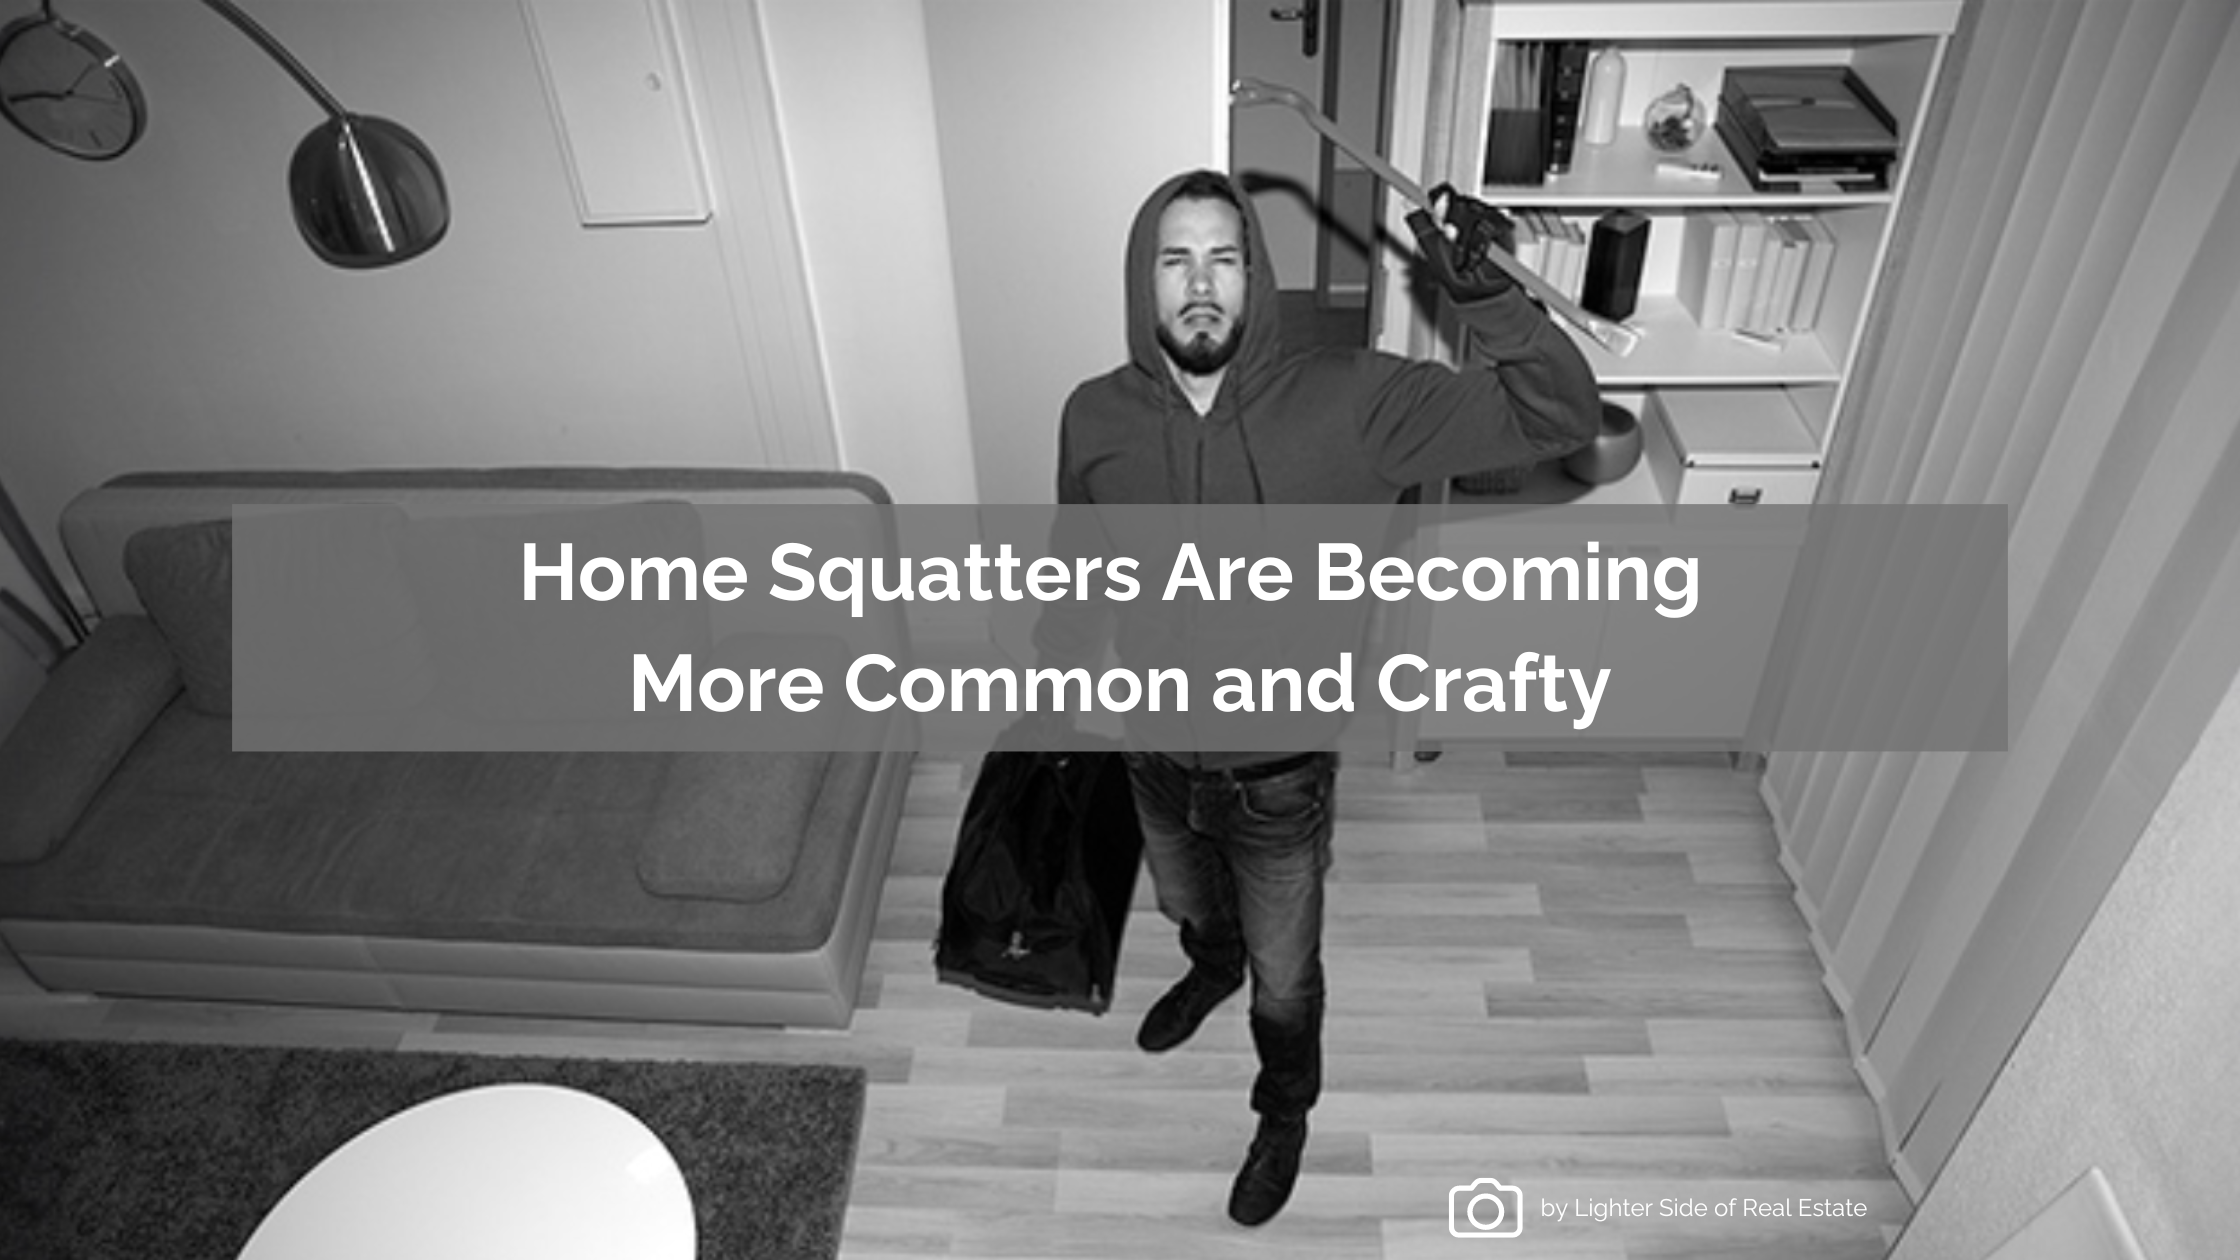 Home Squatters Are Becoming More Common and Crafty. Here’s How to Prevent It from Happening to Your Home